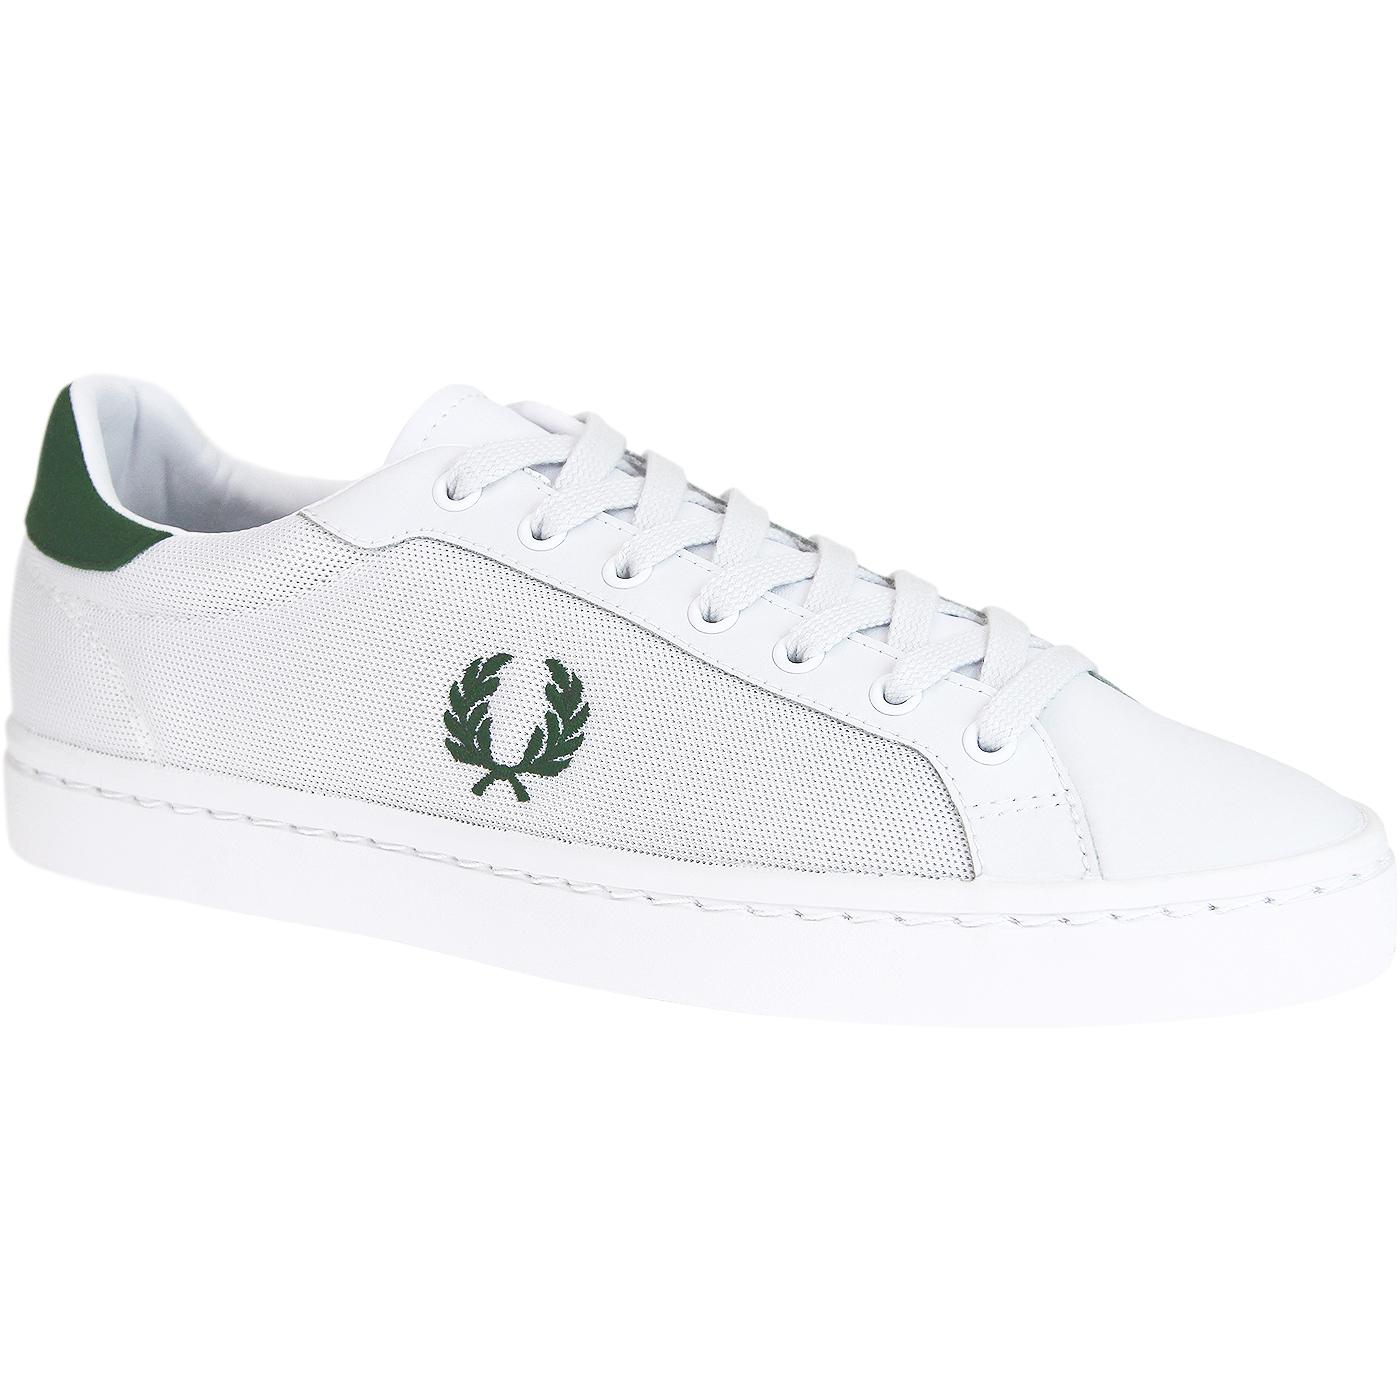 FRED PERRY Lawn Leather/Mesh Retro Men's Trainers